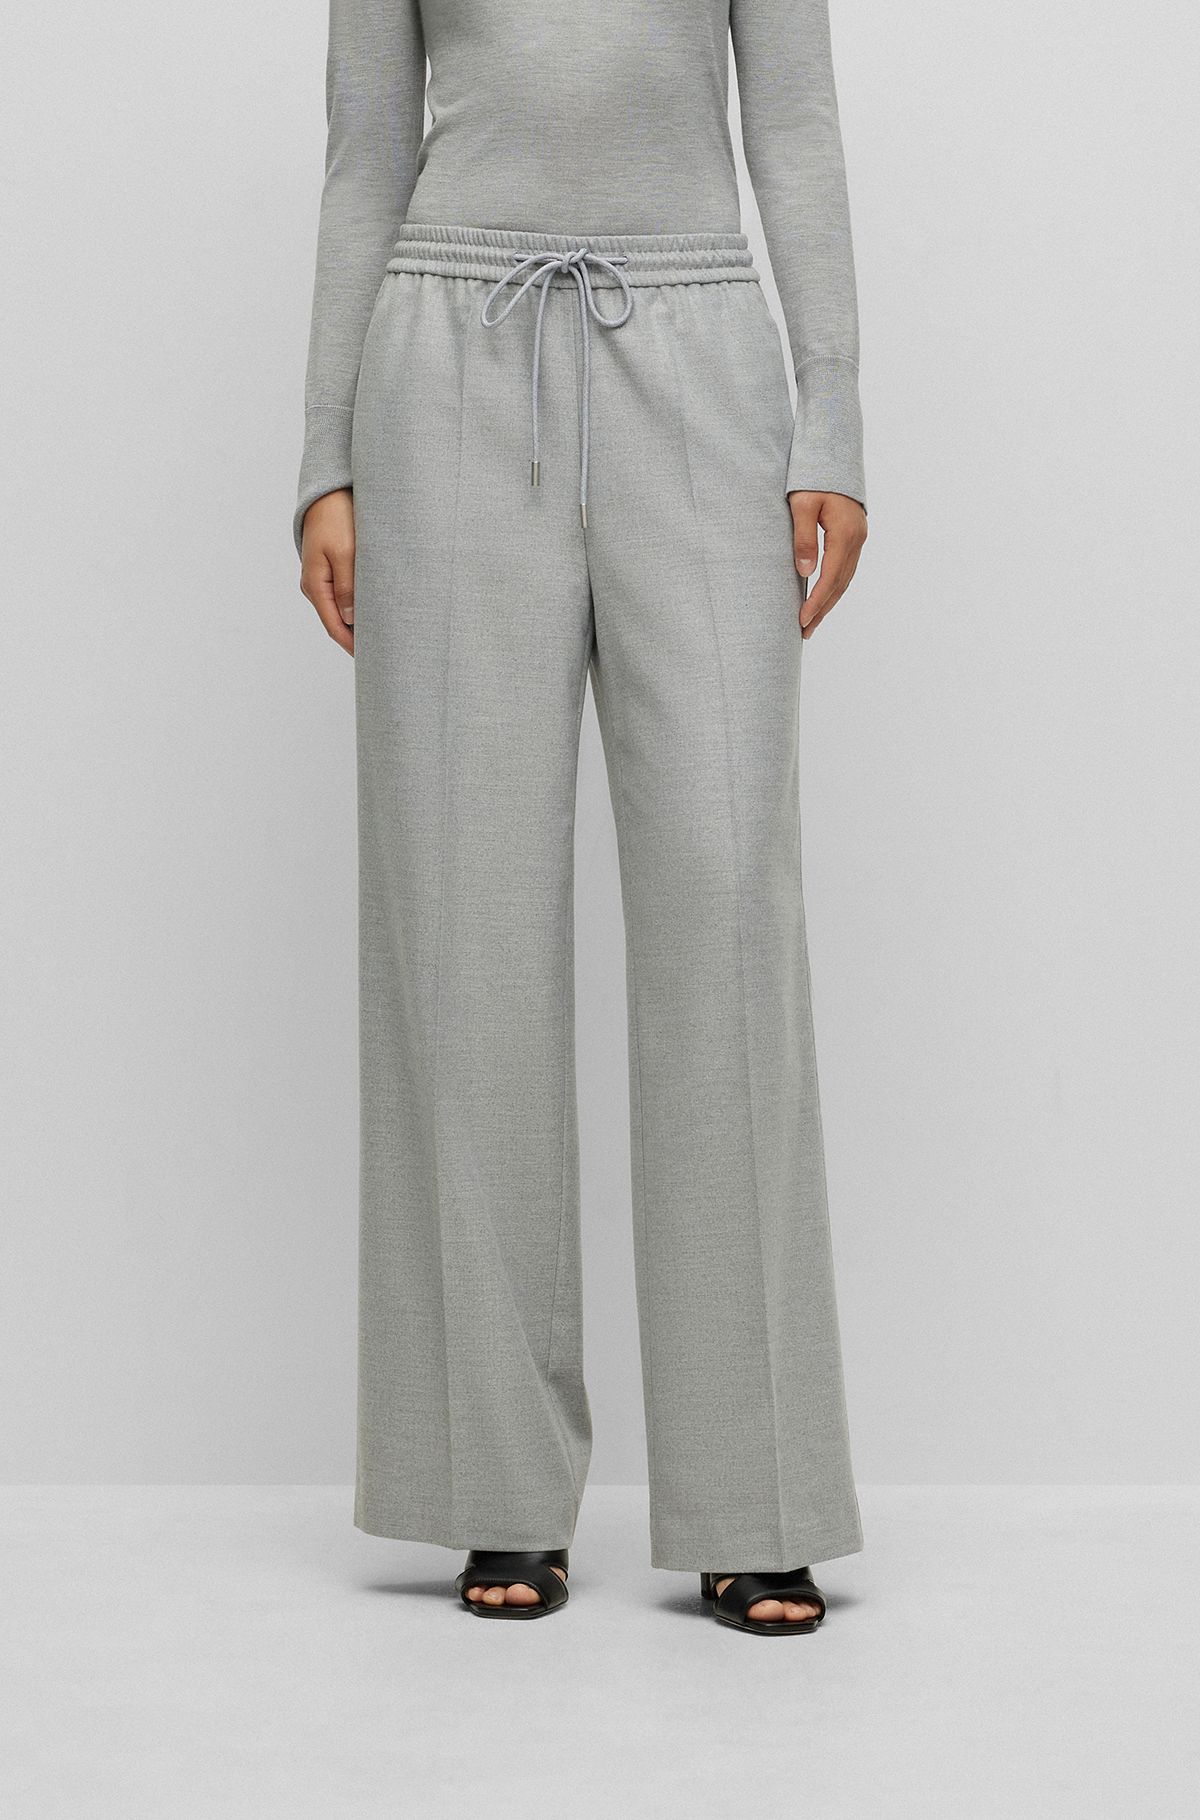 Relaxed-fit trousers with branded waistband detail, Light Grey